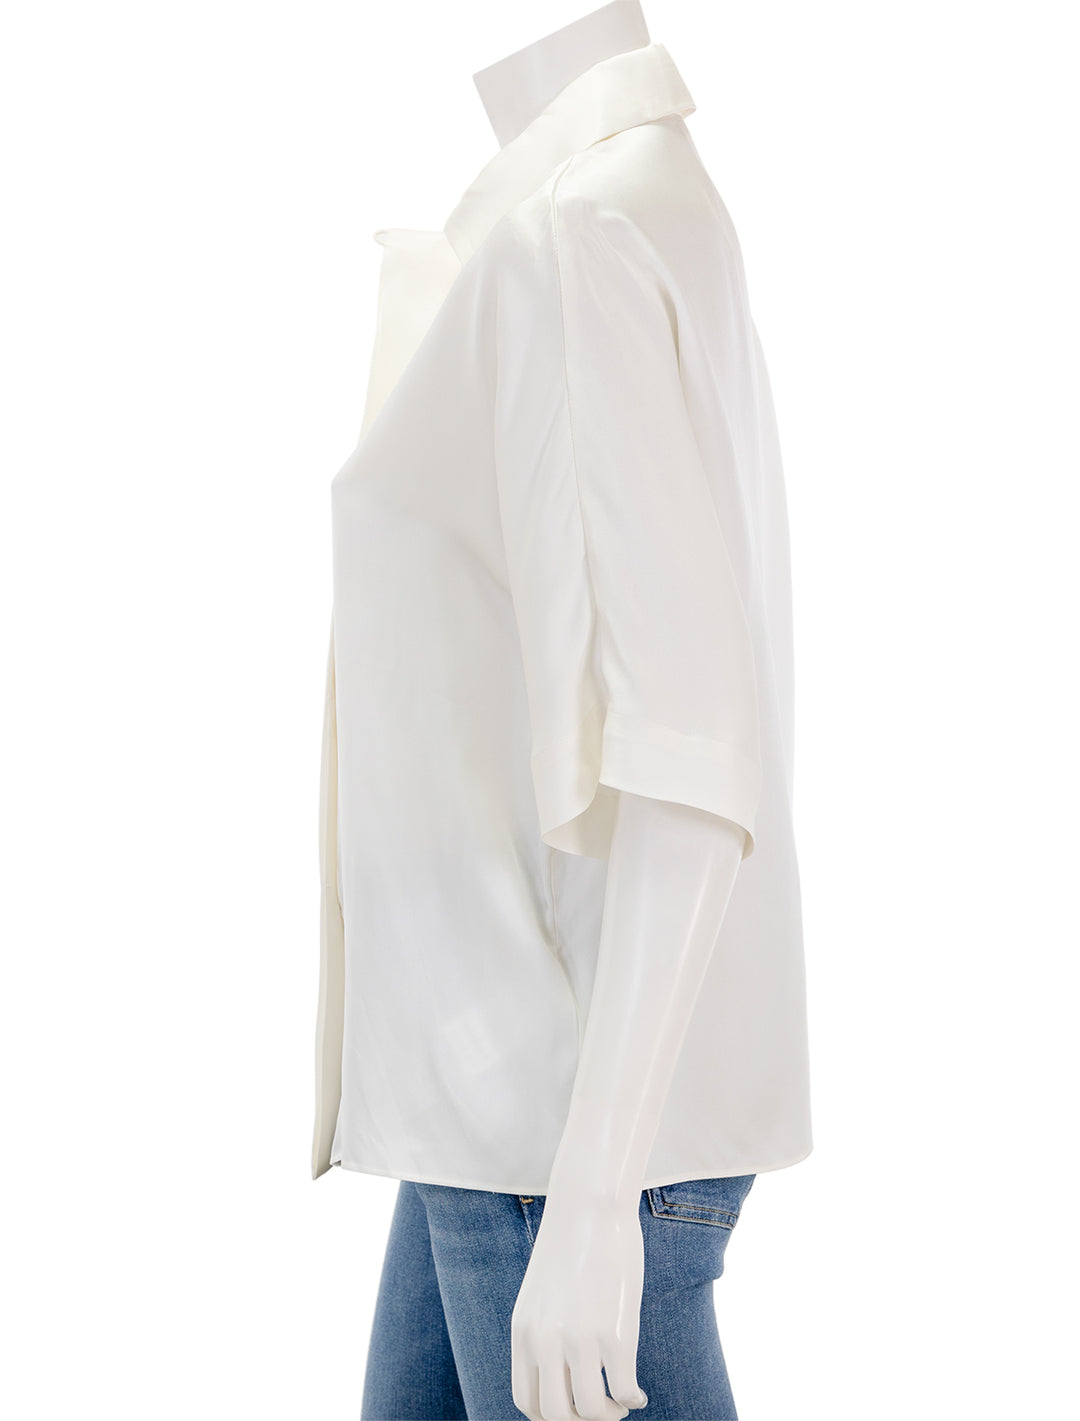 Side view of Anine Bing's julia blouse in ivory.